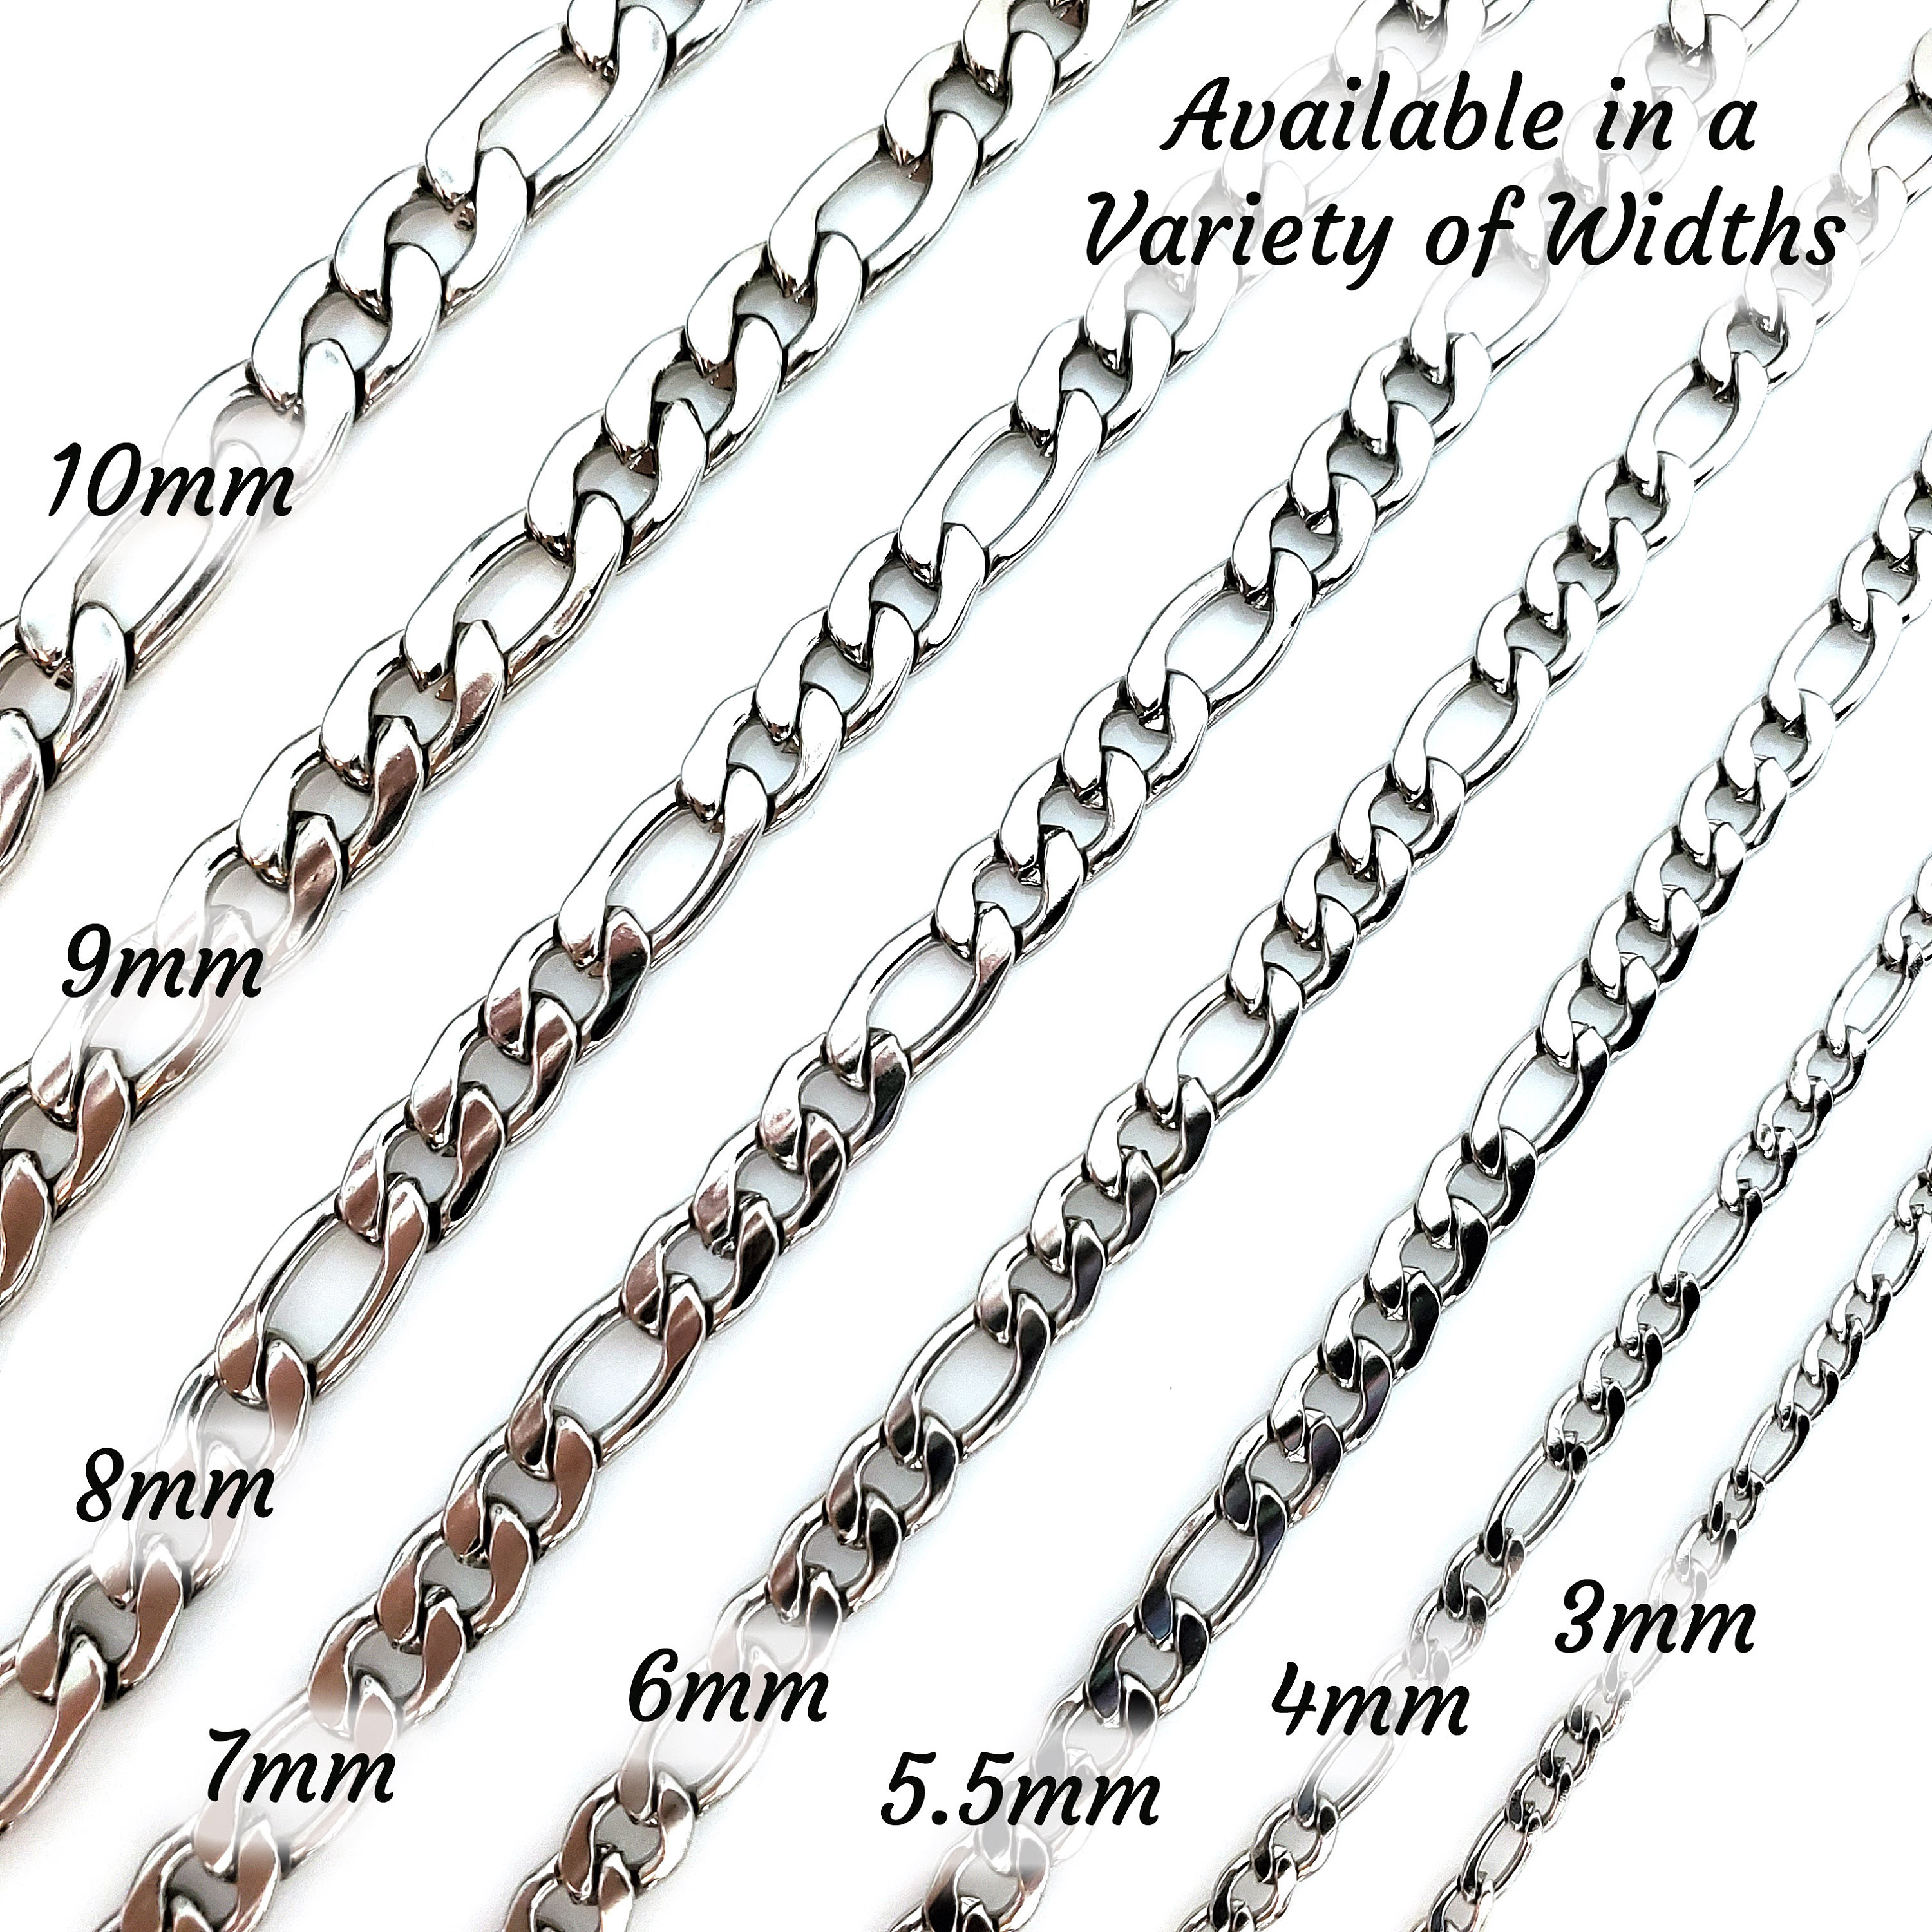 Stainless Steel Chain, Bulk Chain, Jewelry Making Chain, Fine Chain, Oval  Links, Hypoallergenic, 2x1.5mm Links, Lot Size 4 to 20 Feet, 1902 